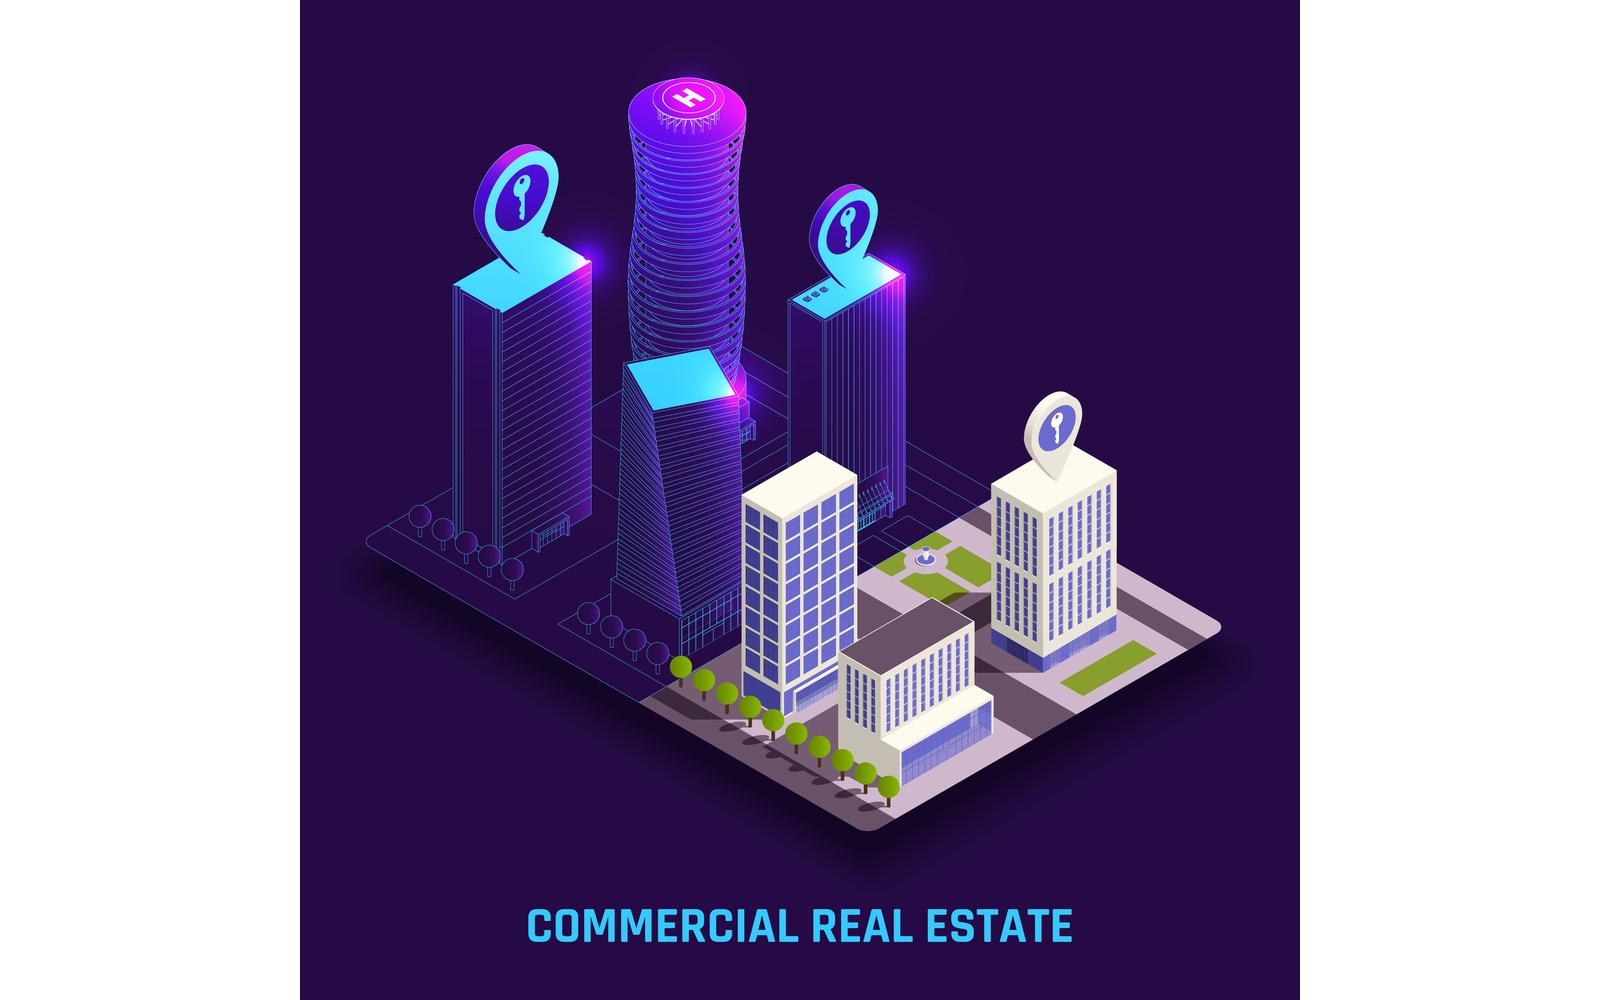 Commercial Real Estate Isometric 210210101 Vector Illustration Concept